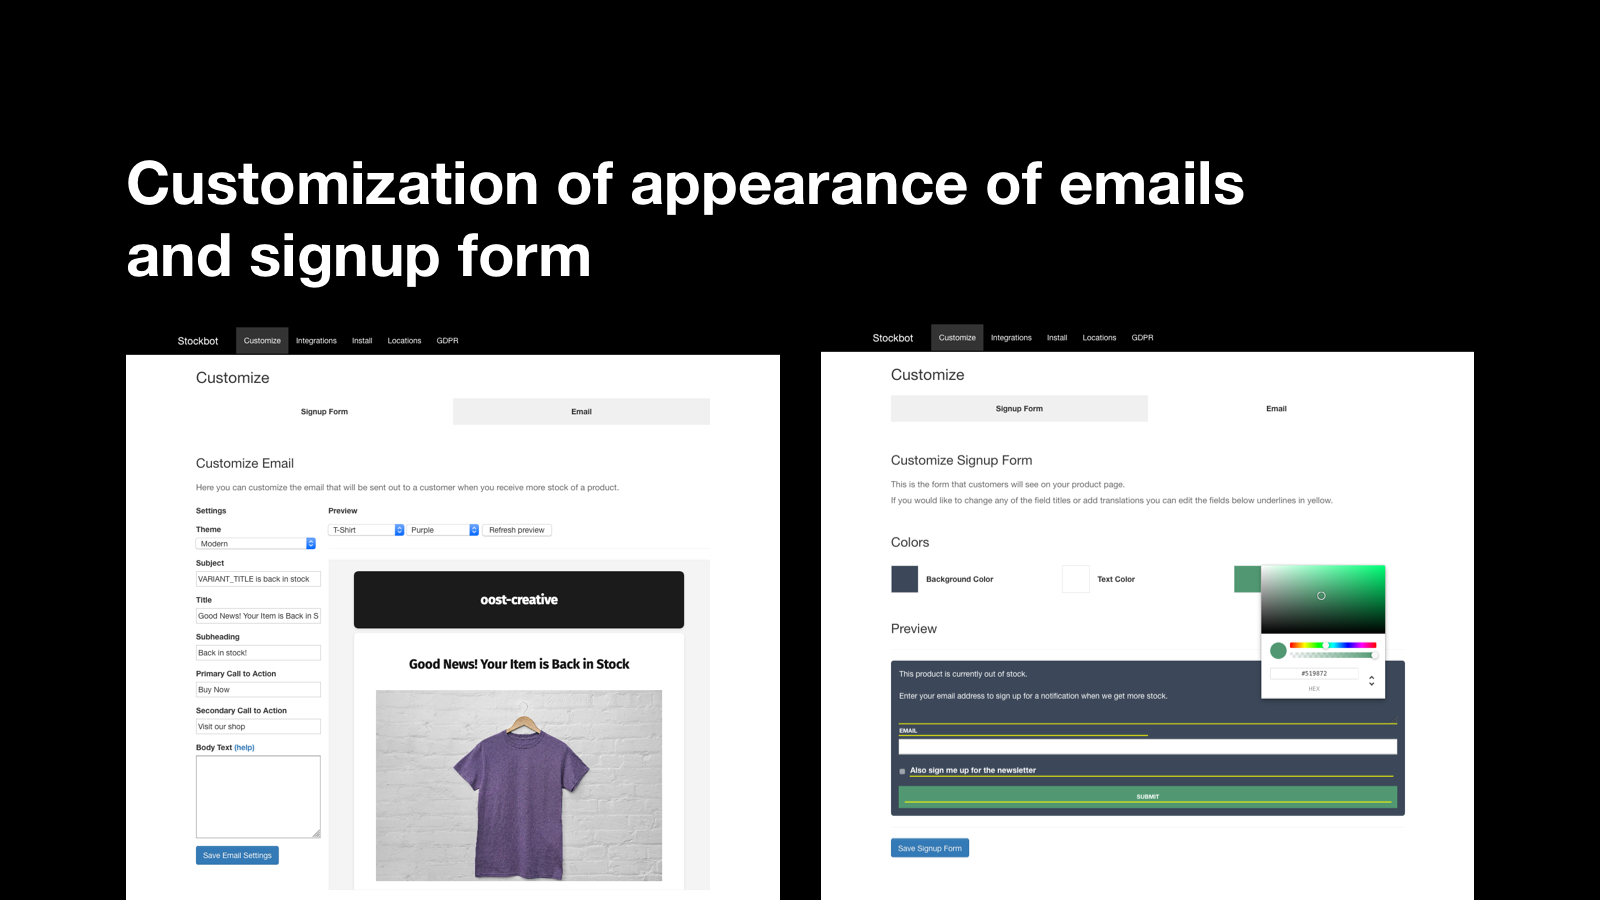 Customization of appearance of emails and signup form